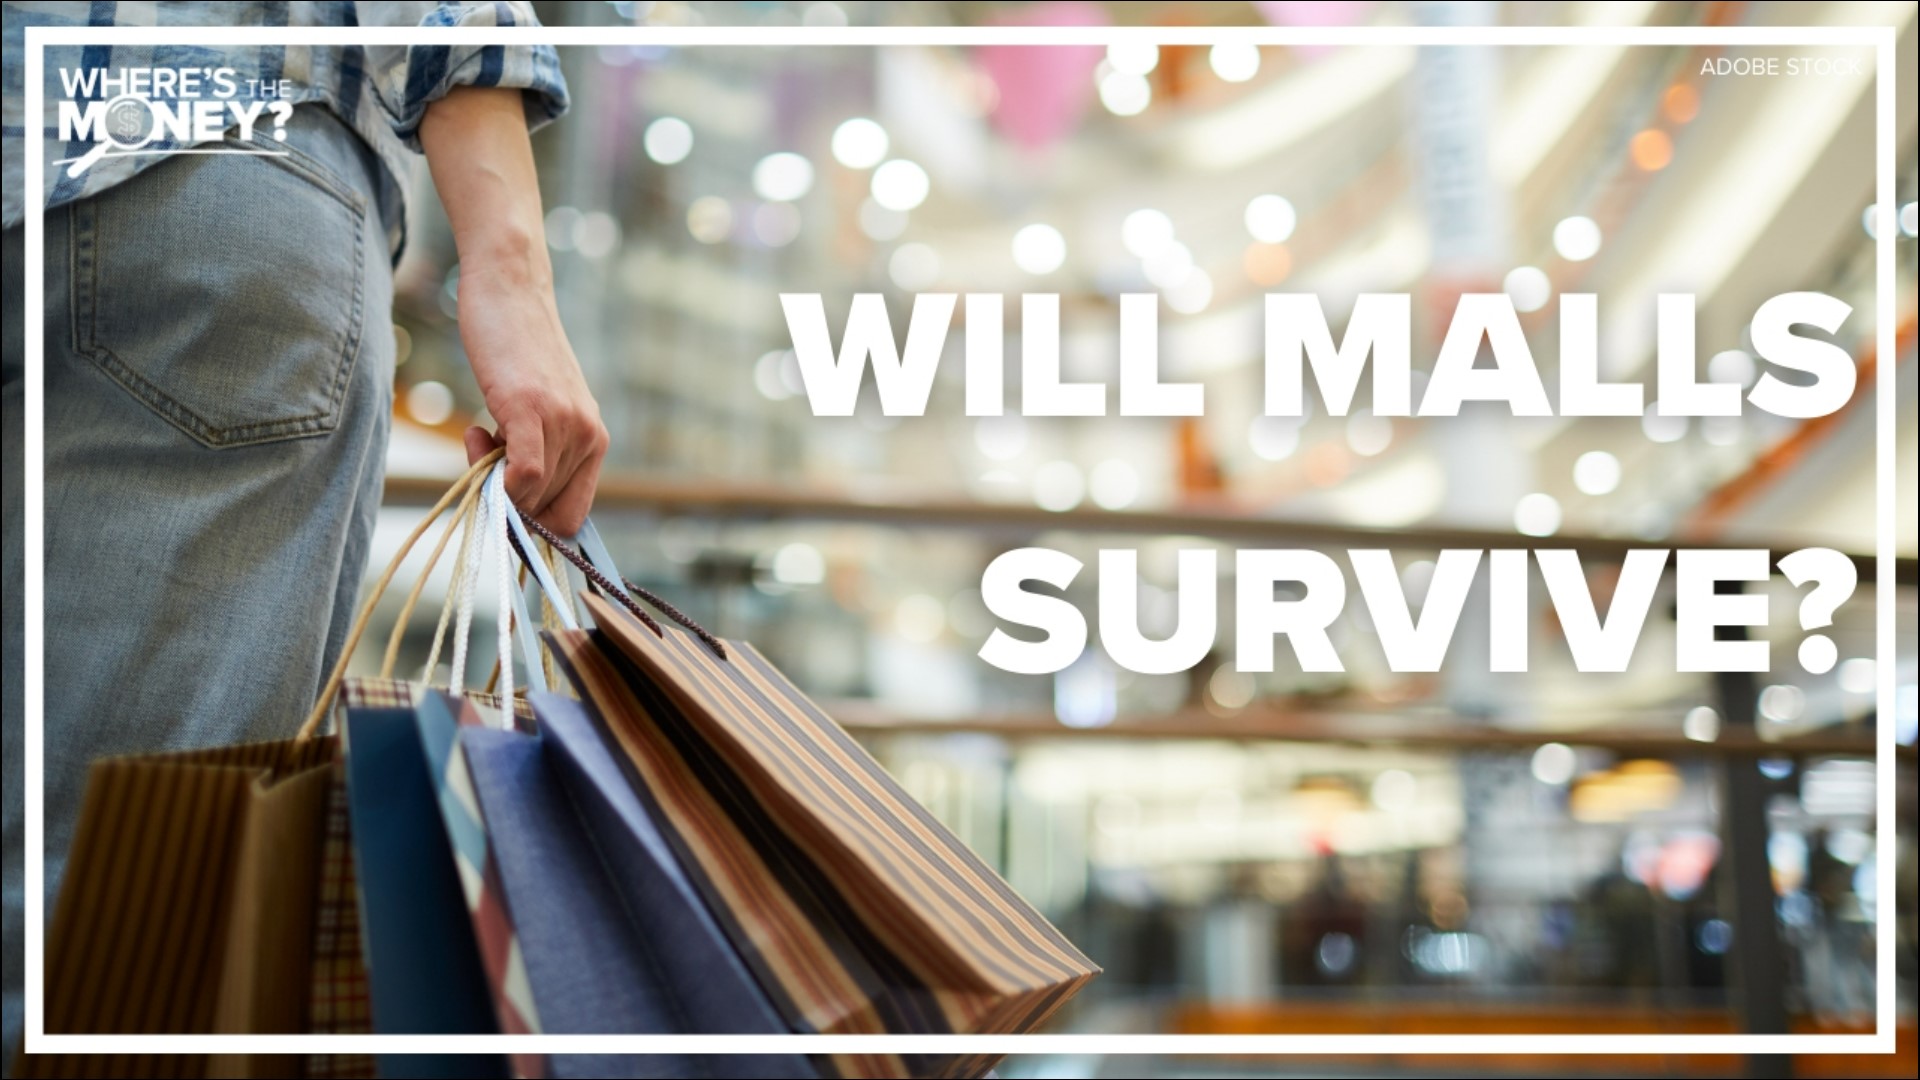 You’ve probably heard experts saying shopping malls are dying, and in some cases that’s true. Experts tell us a third of the malls we have now will soon disappear.